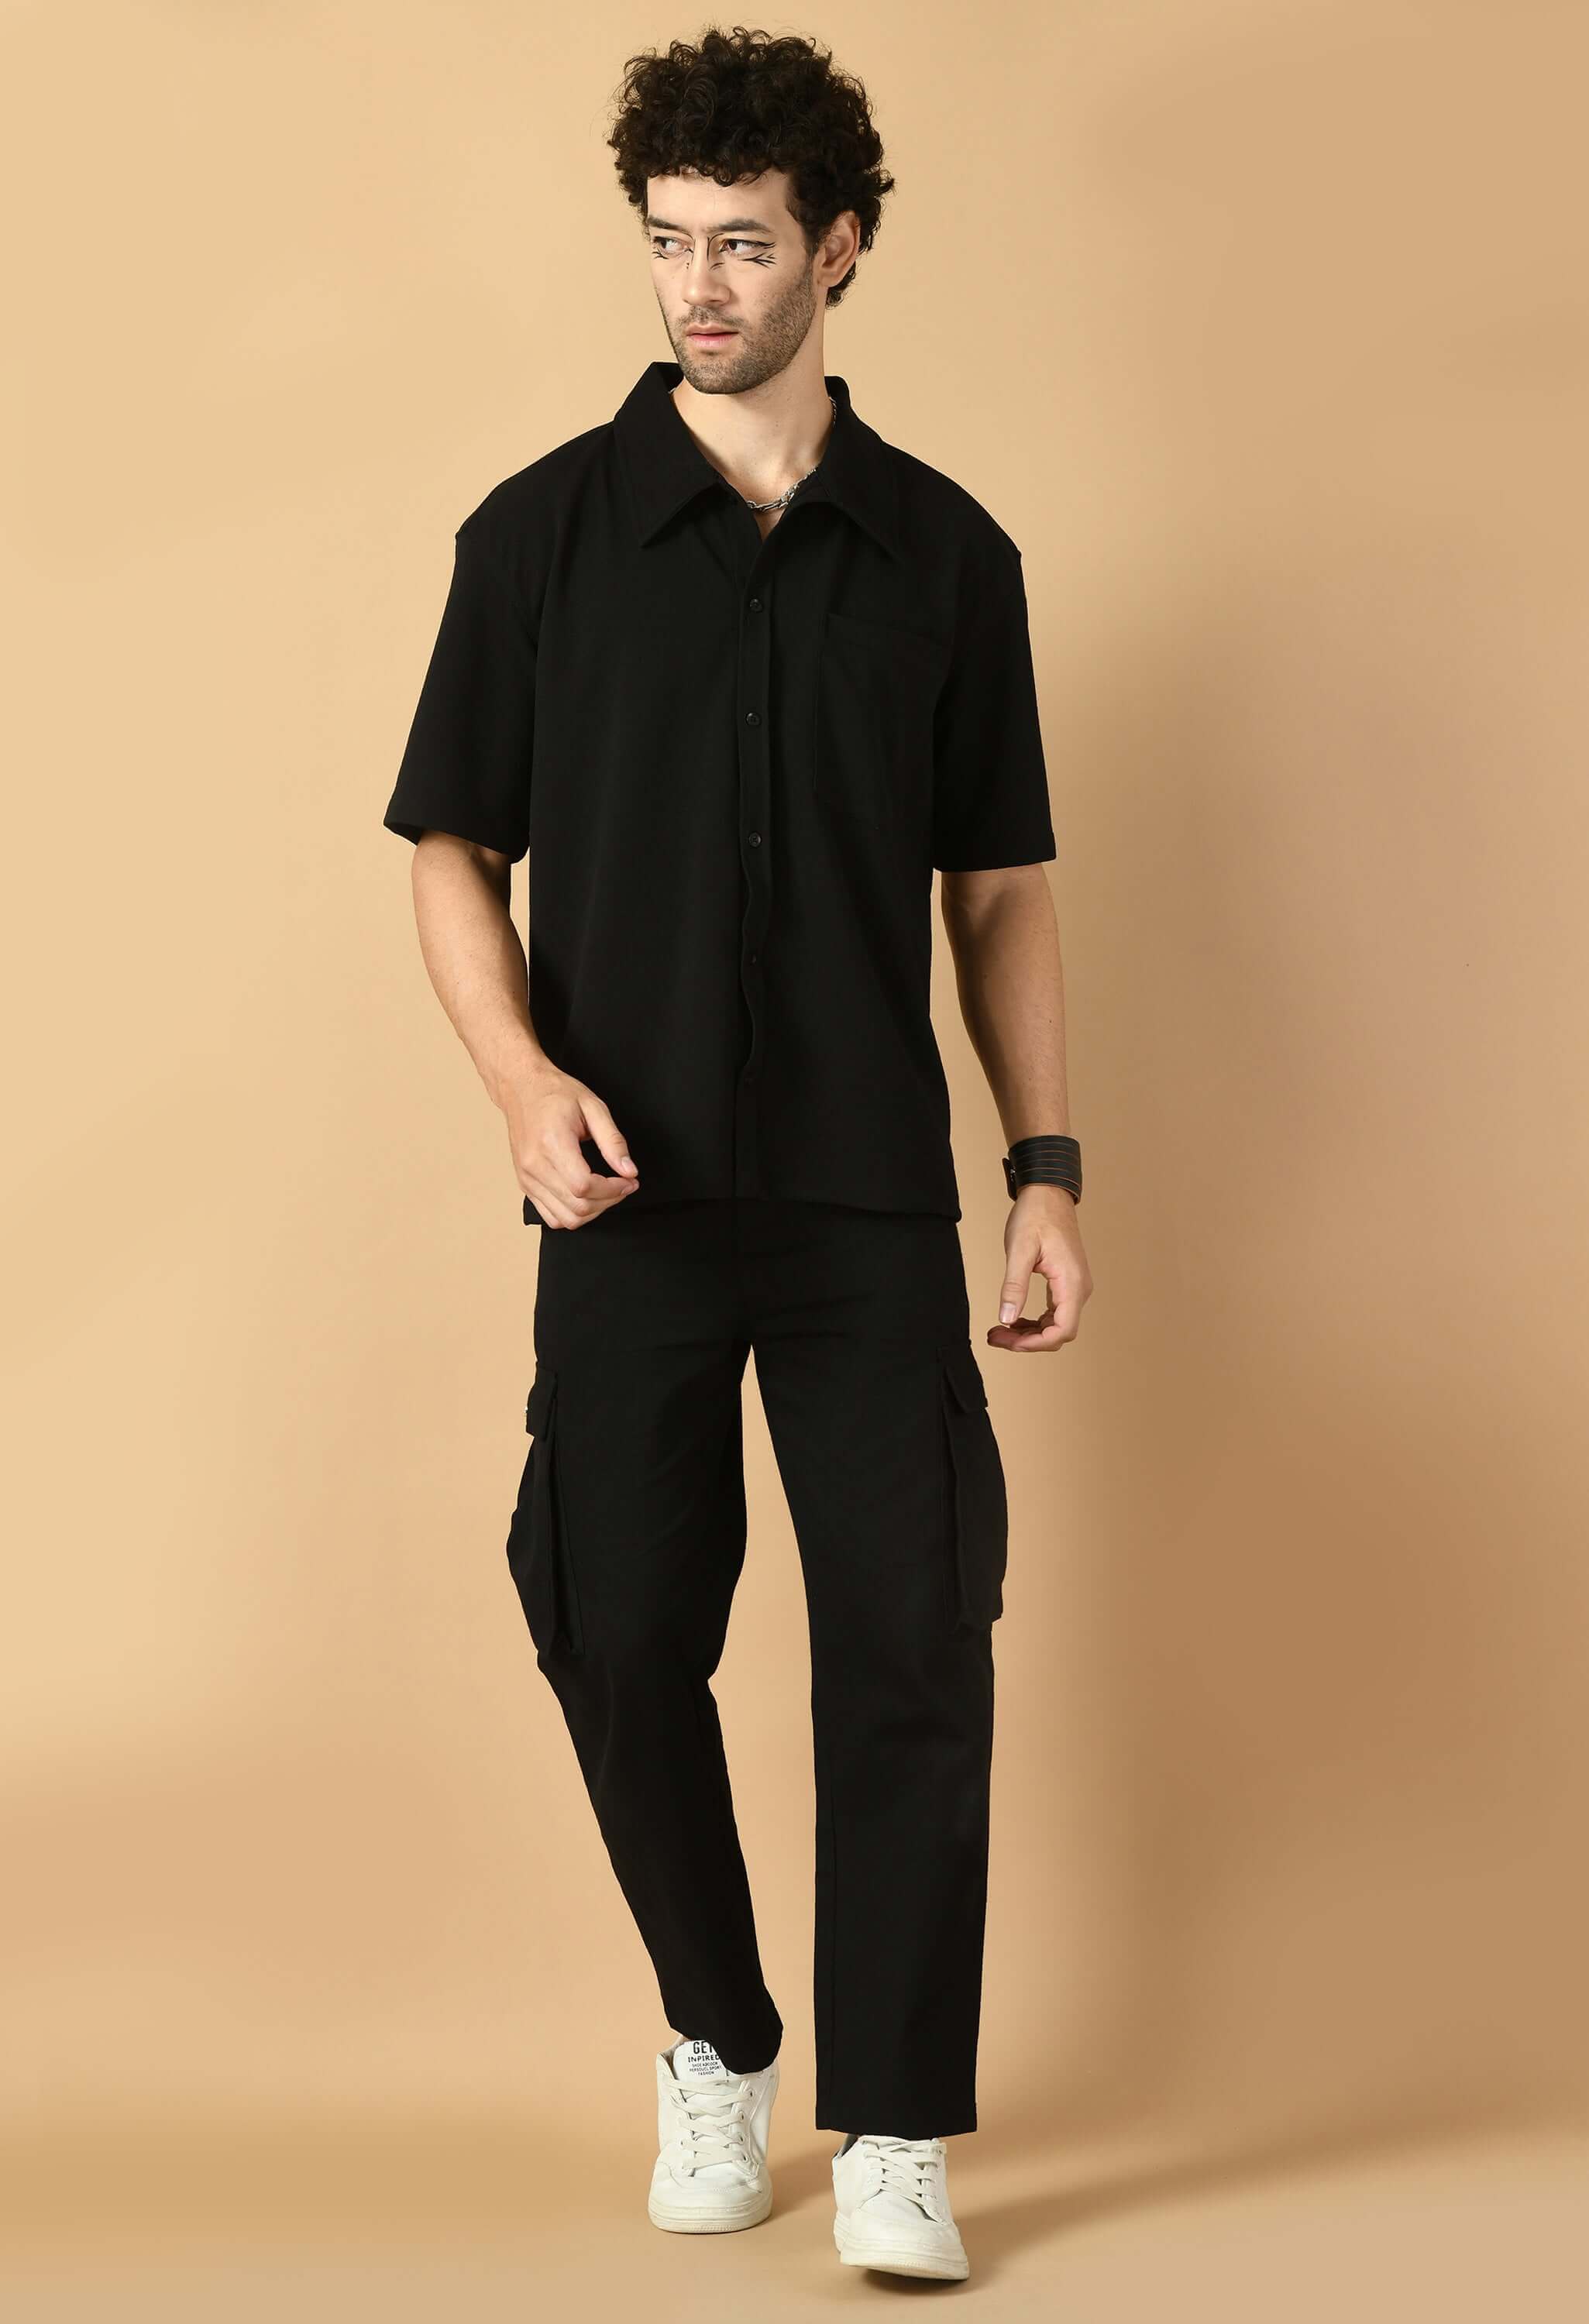 Black overshirt by offmint